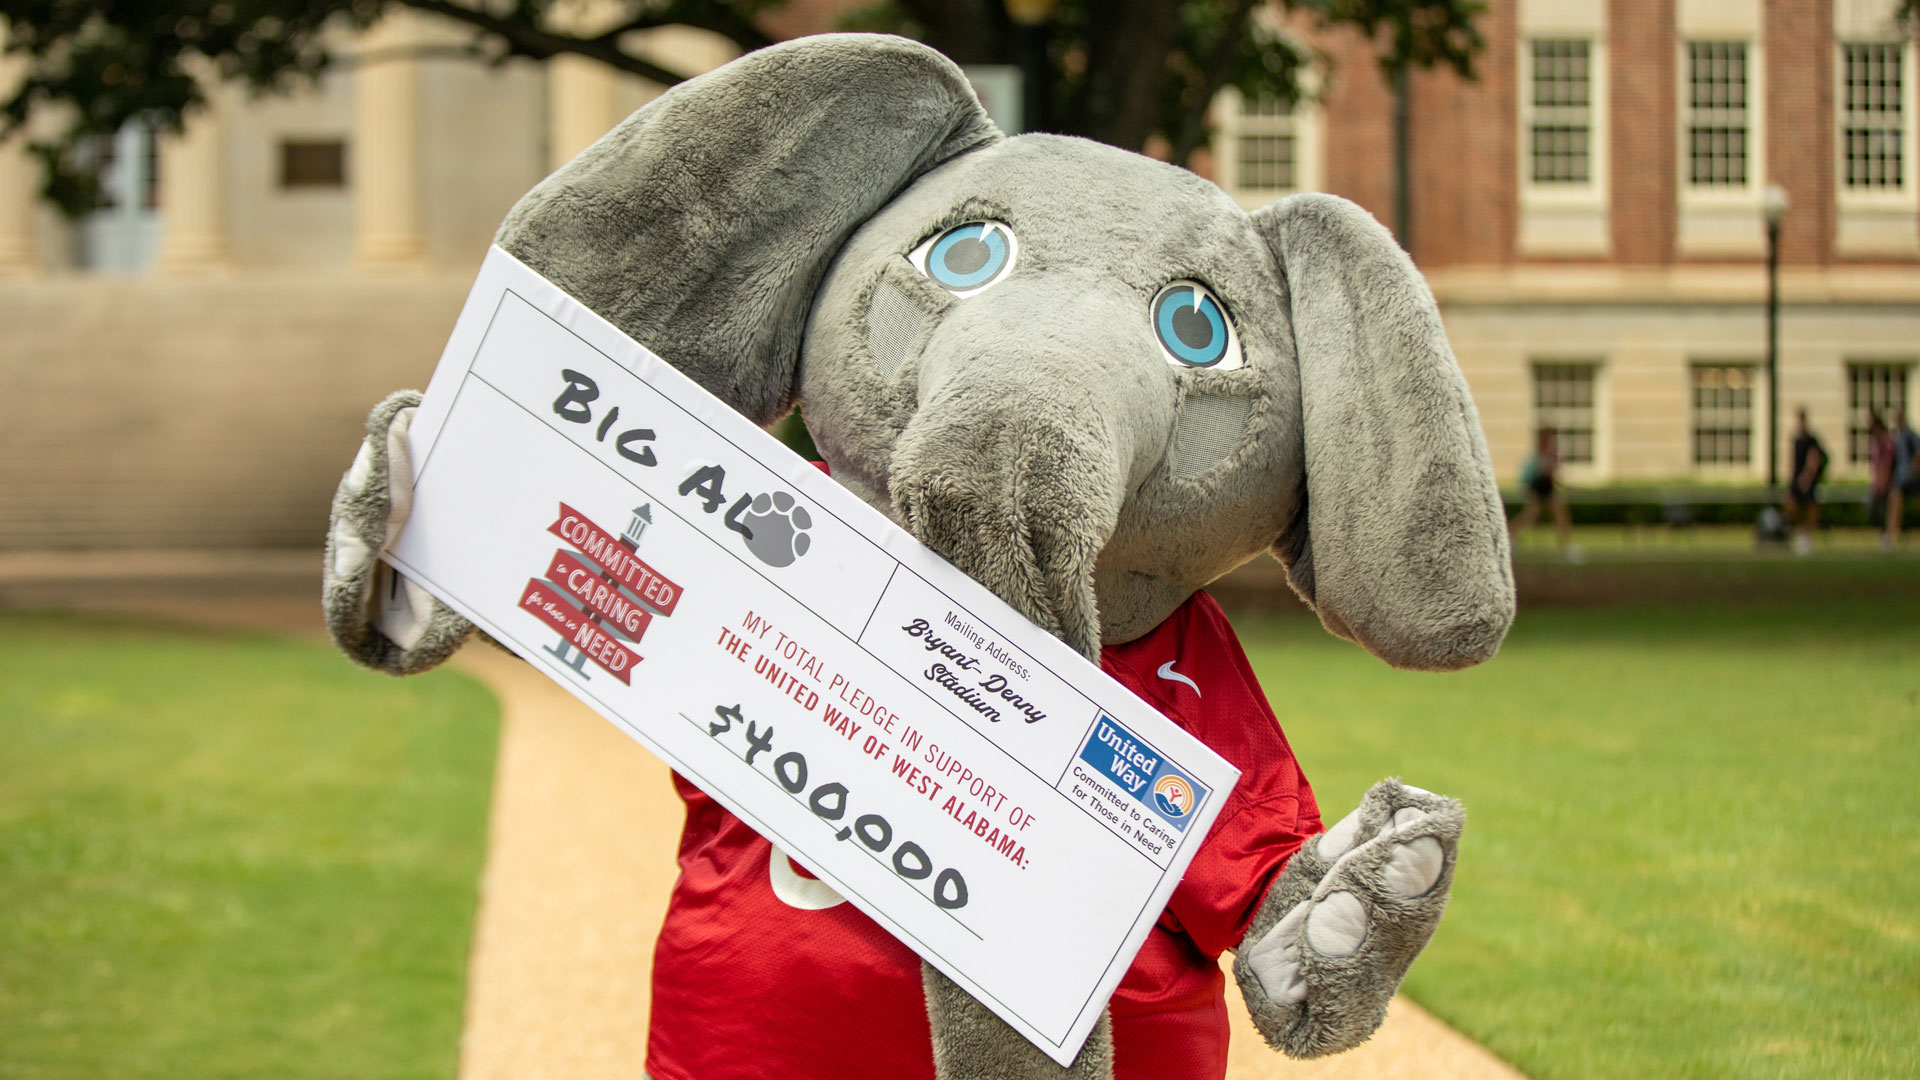 Big Al holds a giant pledge card for the United Way that reads "$400,000